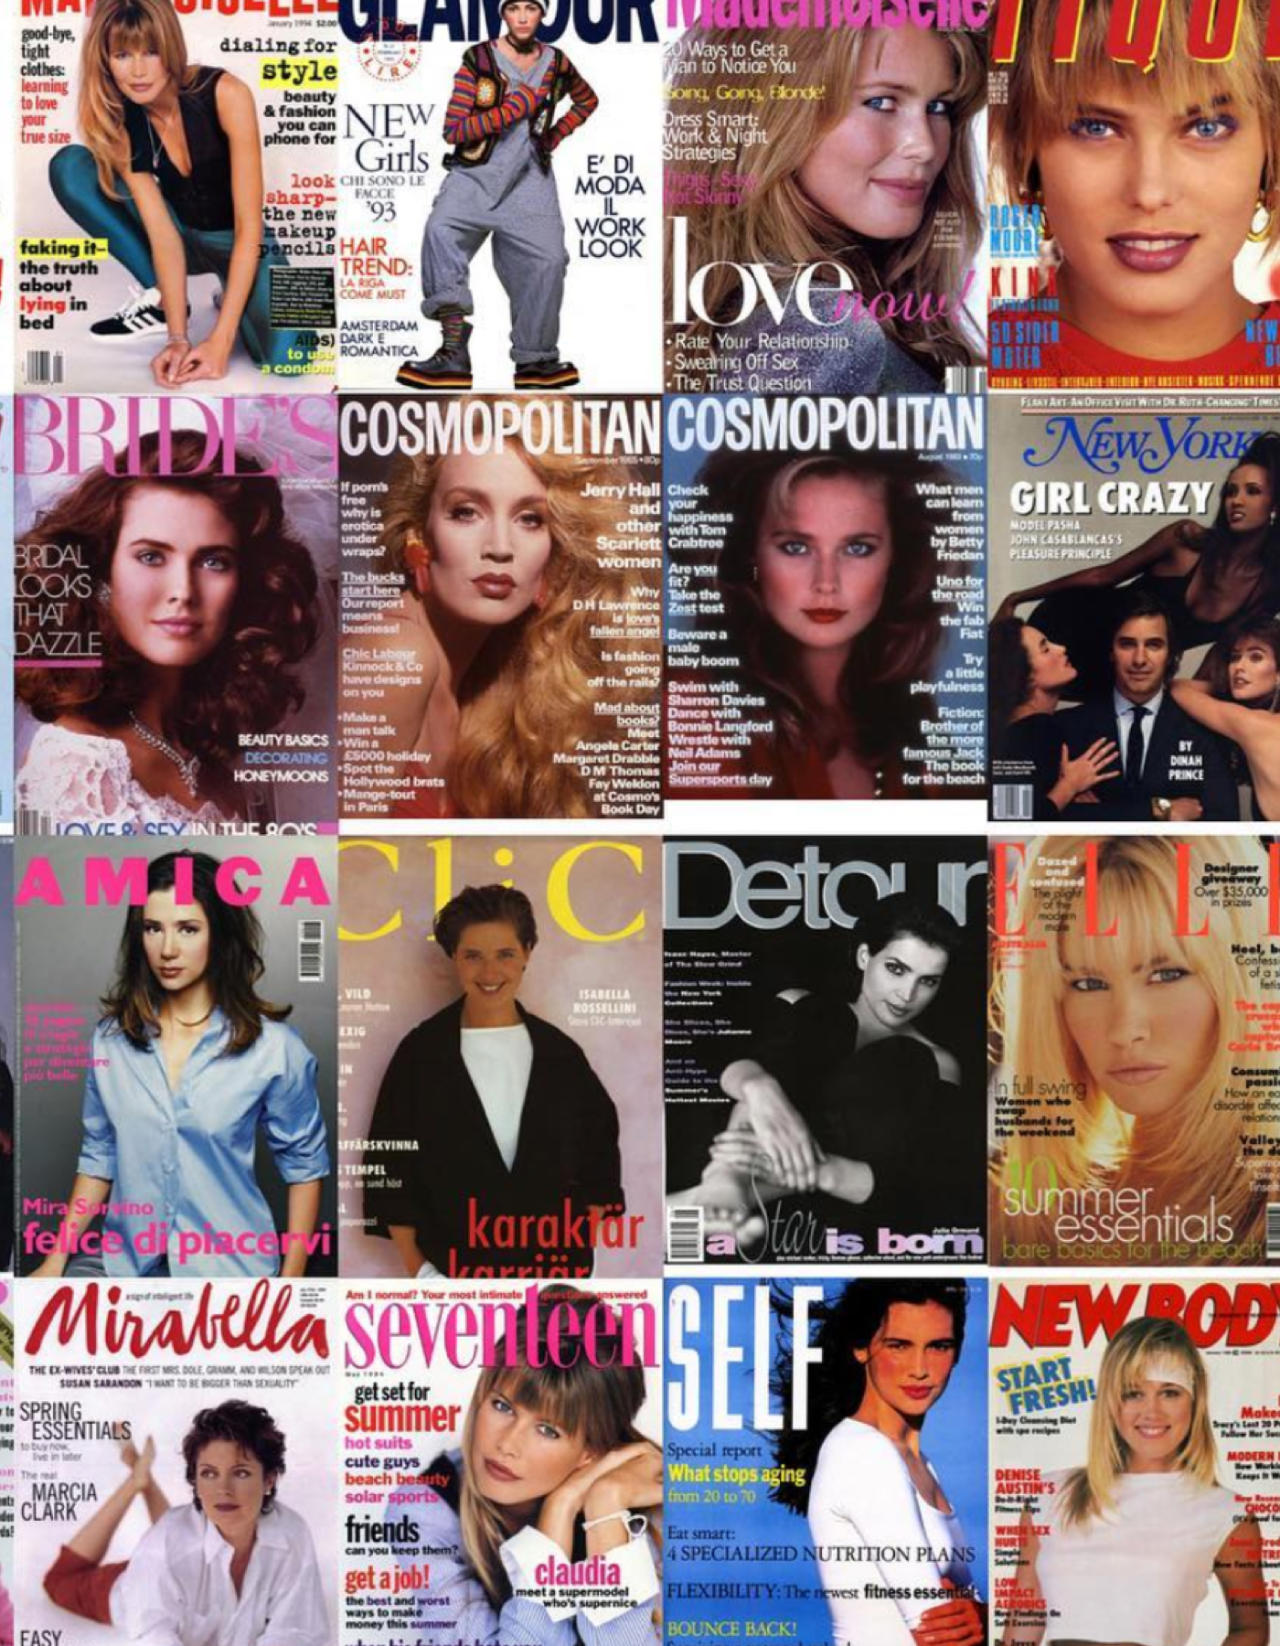 justbobbi_Archive_MagazineCovers